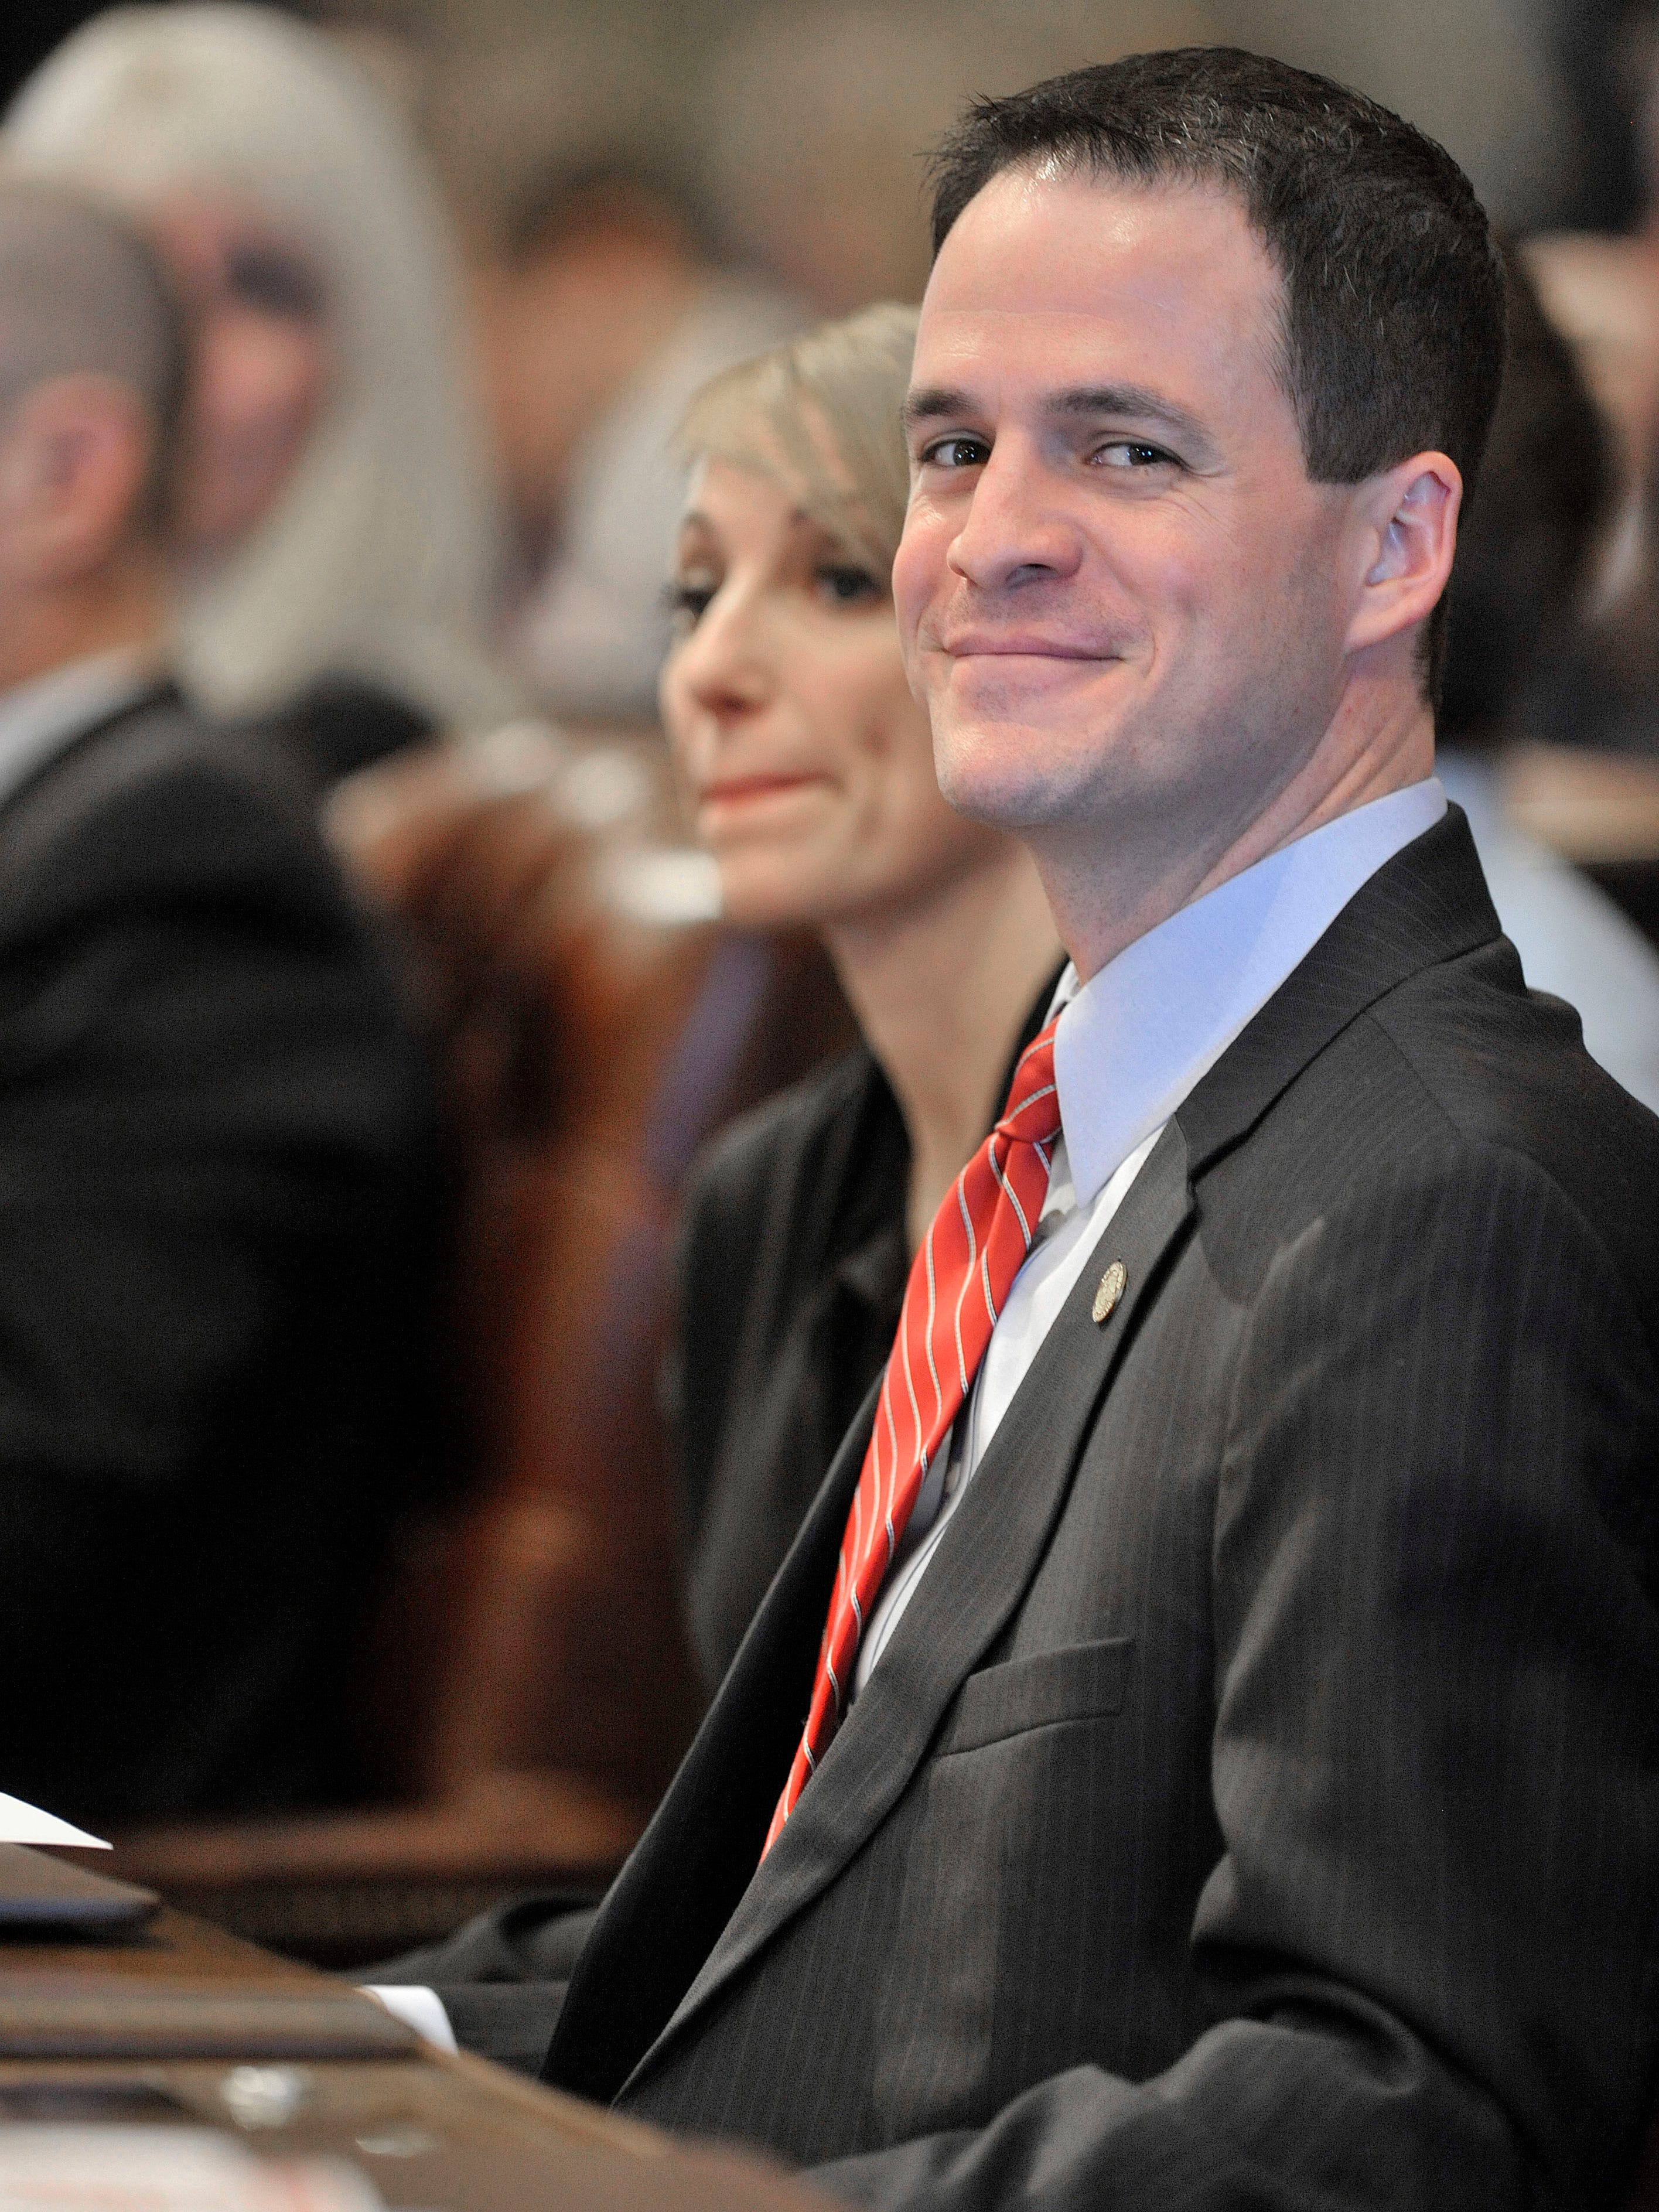 The new Speaker of the House, Kevin Cotter, R-Mount Pleasant, was all smiles while seated next to his wife, Jennifer.